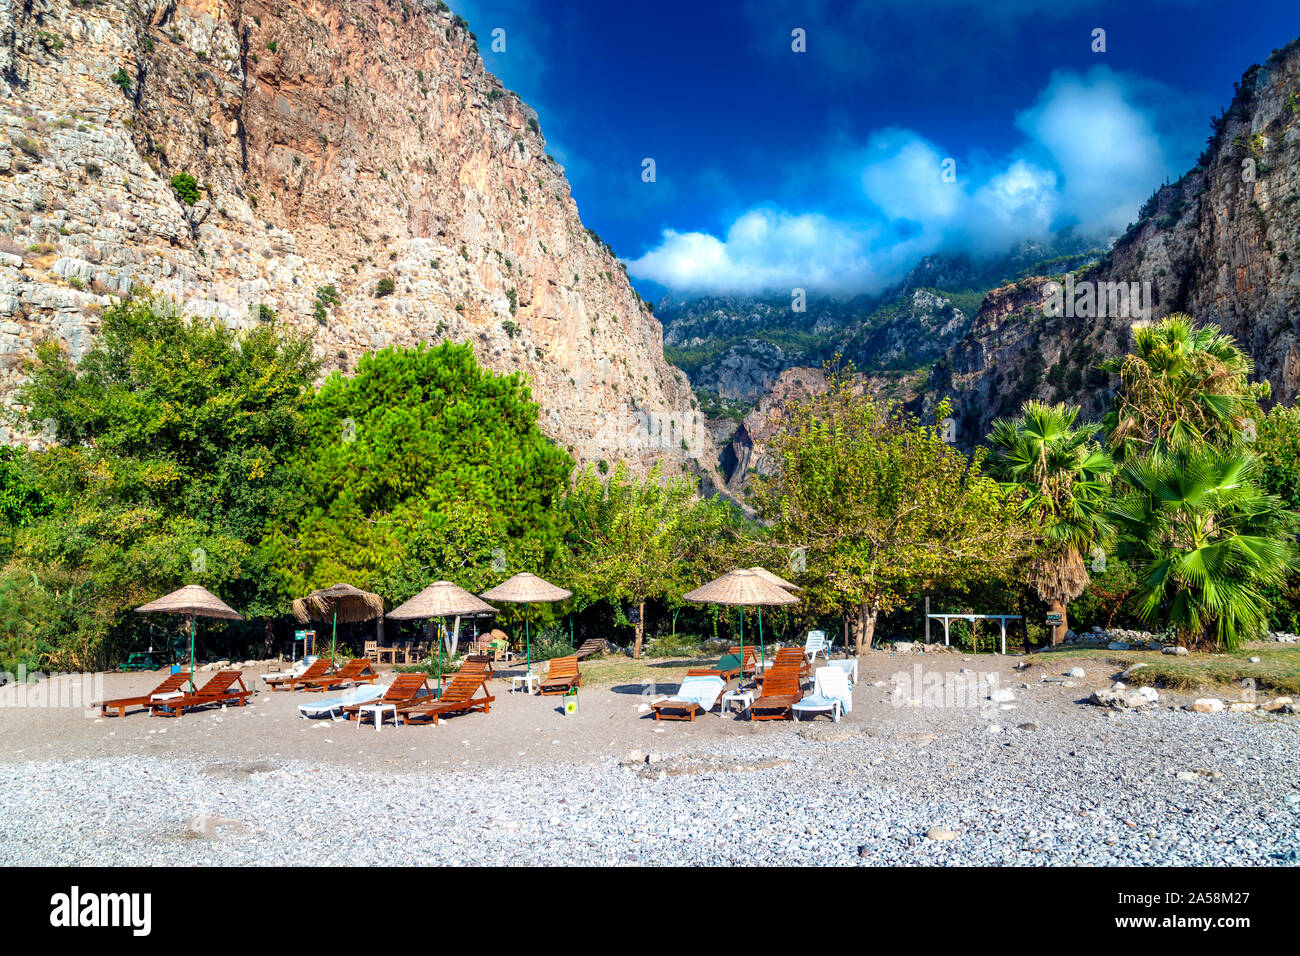 Sun loungers and straw parasols on the beach in the Butterfly Valley, Turkish Riviera, Turkey Stock Photo